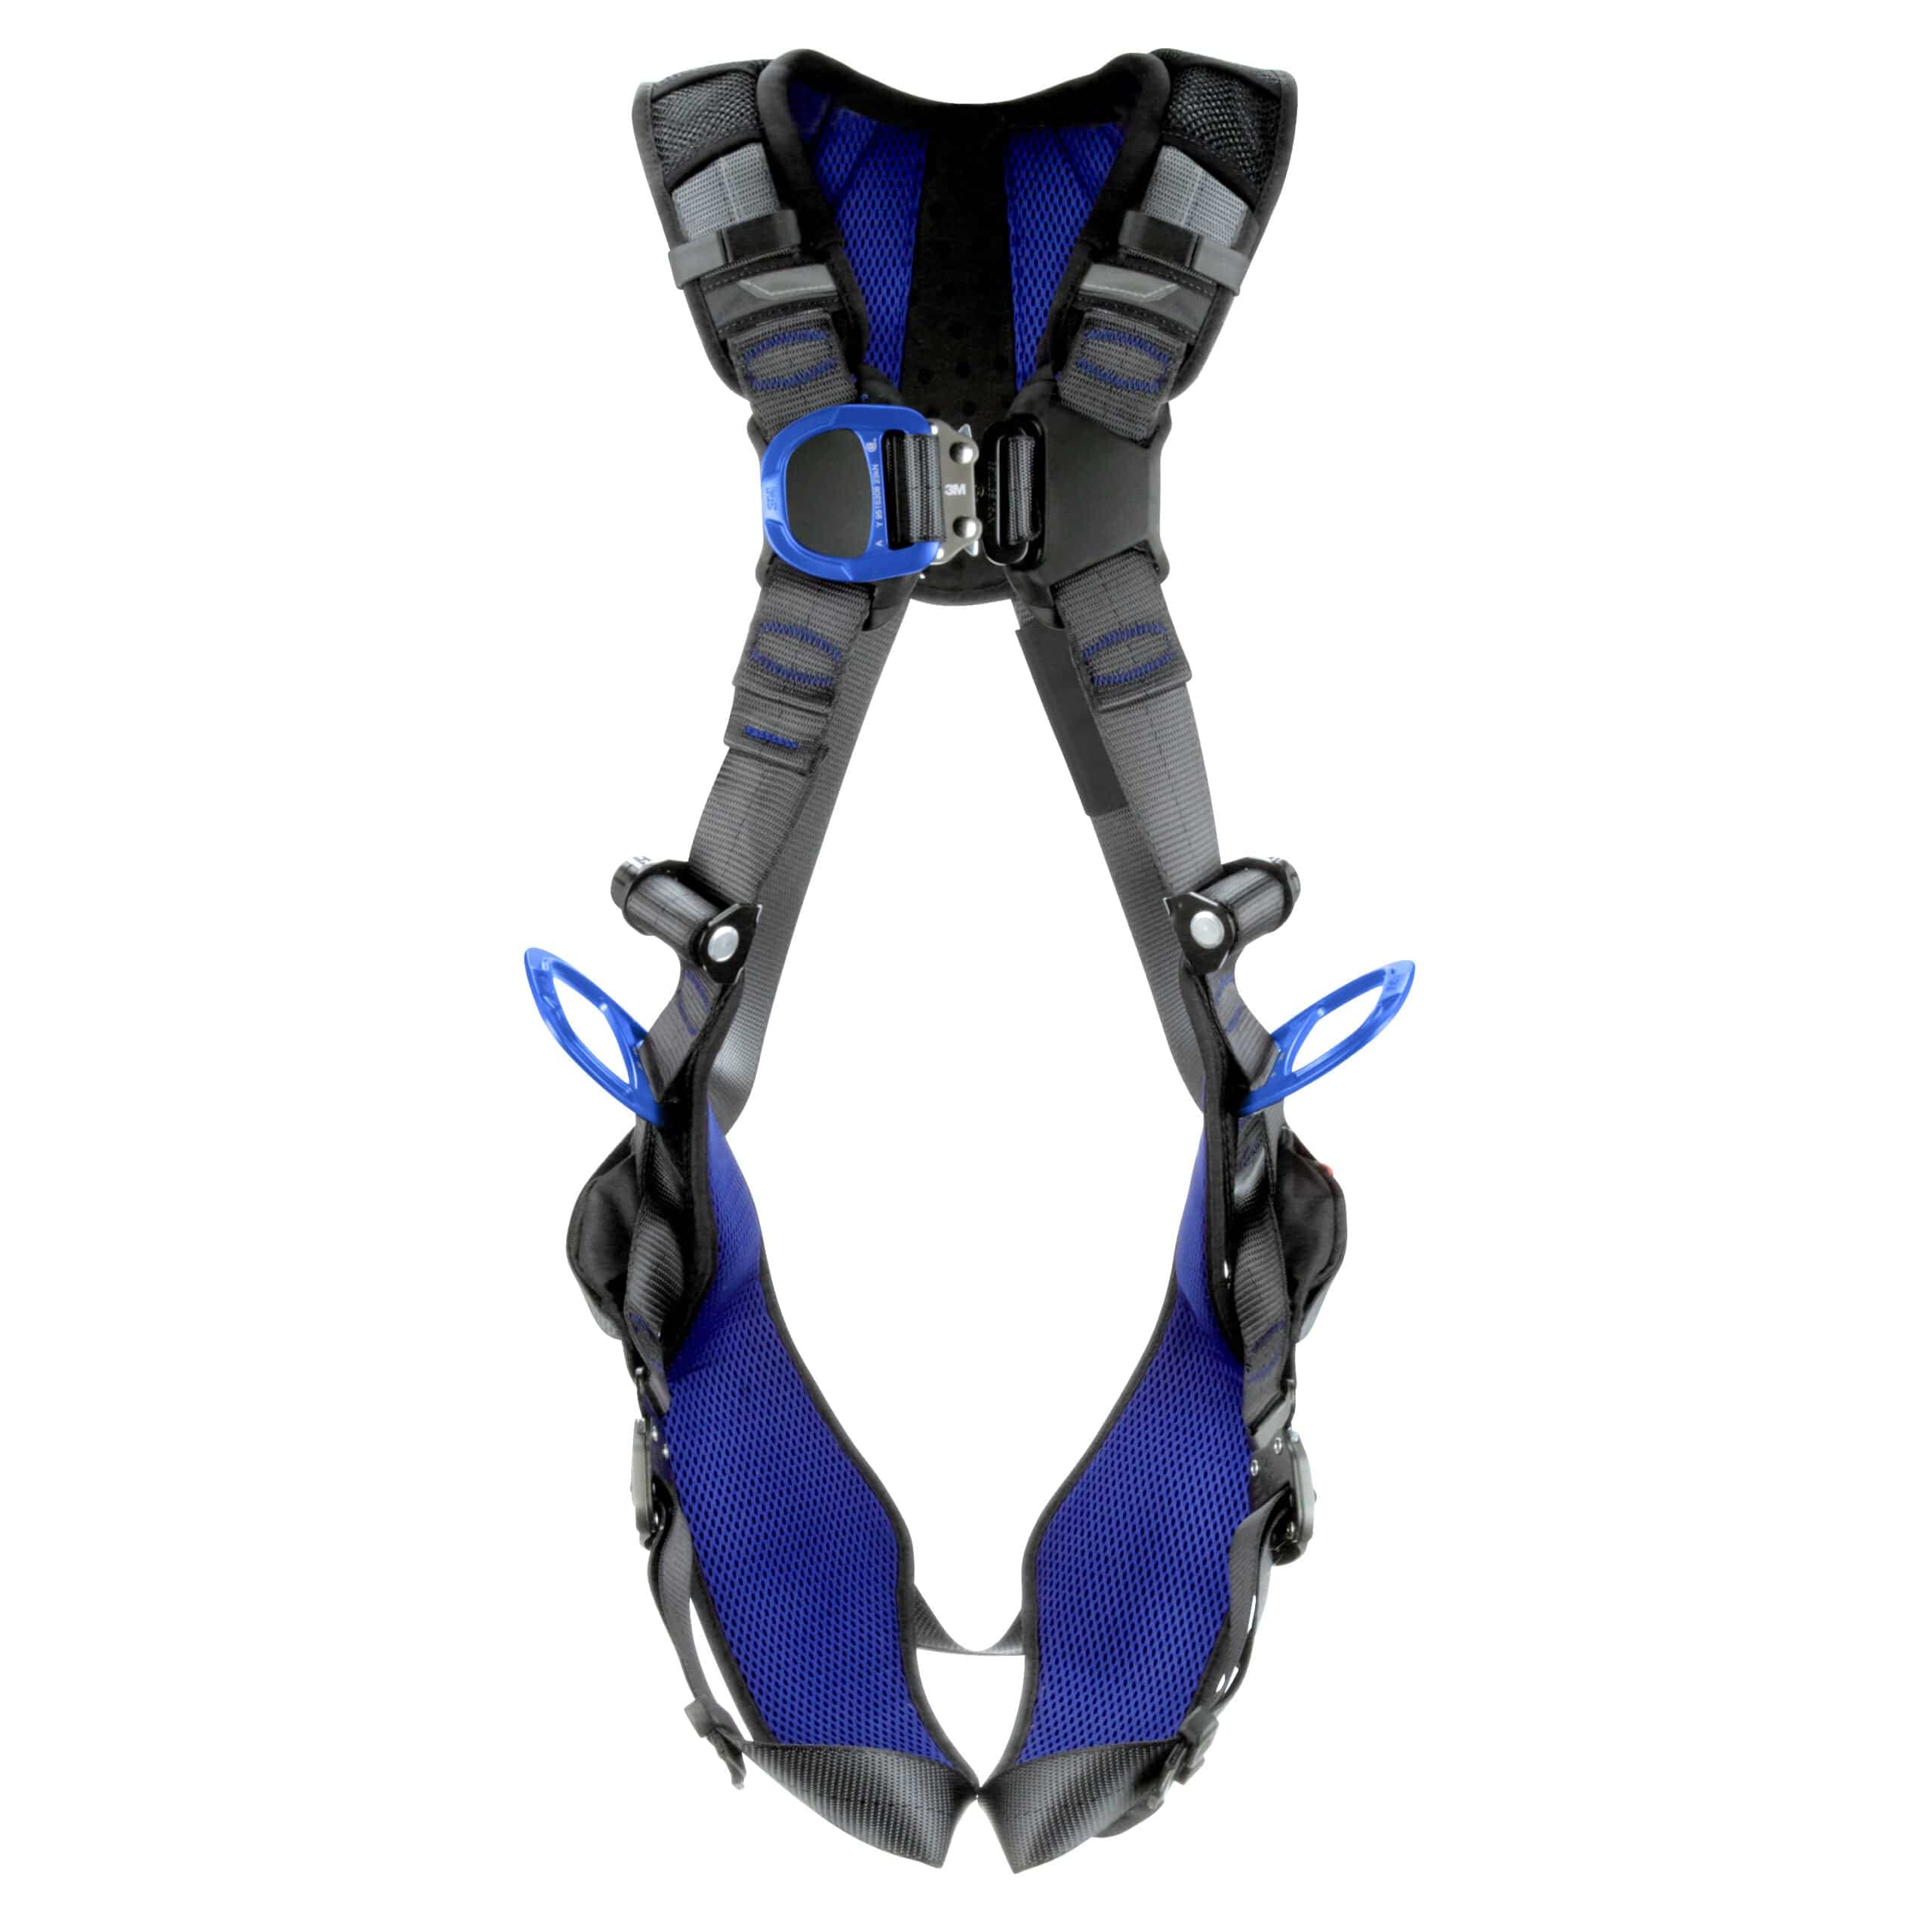 3M DBI SALA ExoFit XE200 Comfort Wind Energy Safety Harness - SecureHeights